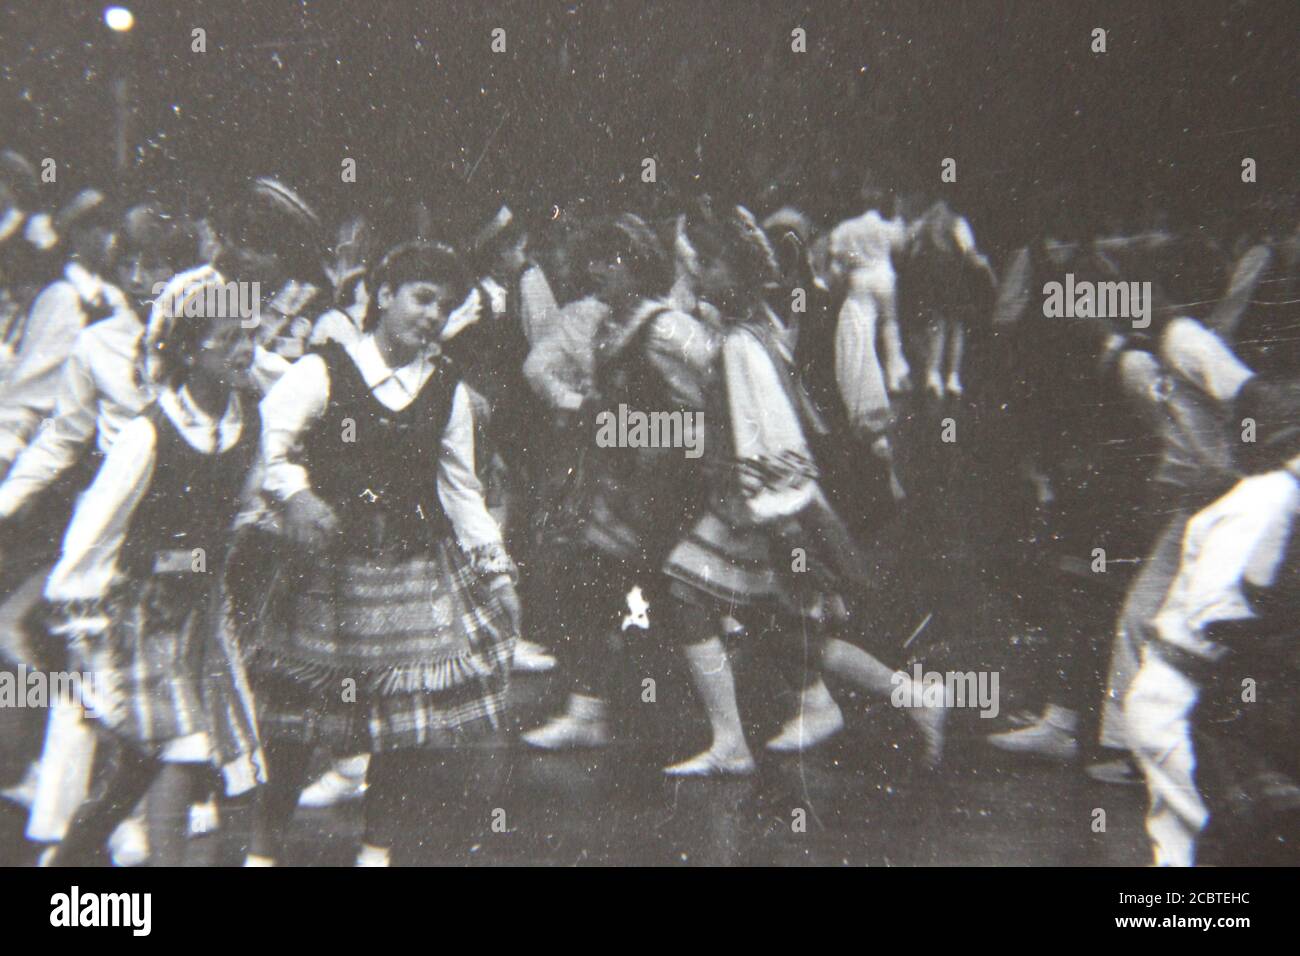 Fine 1970s vintage black and white photography of the Lithuanian folk dancing festival practice day at the UIC Pavilion in Chicago. Stock Photo